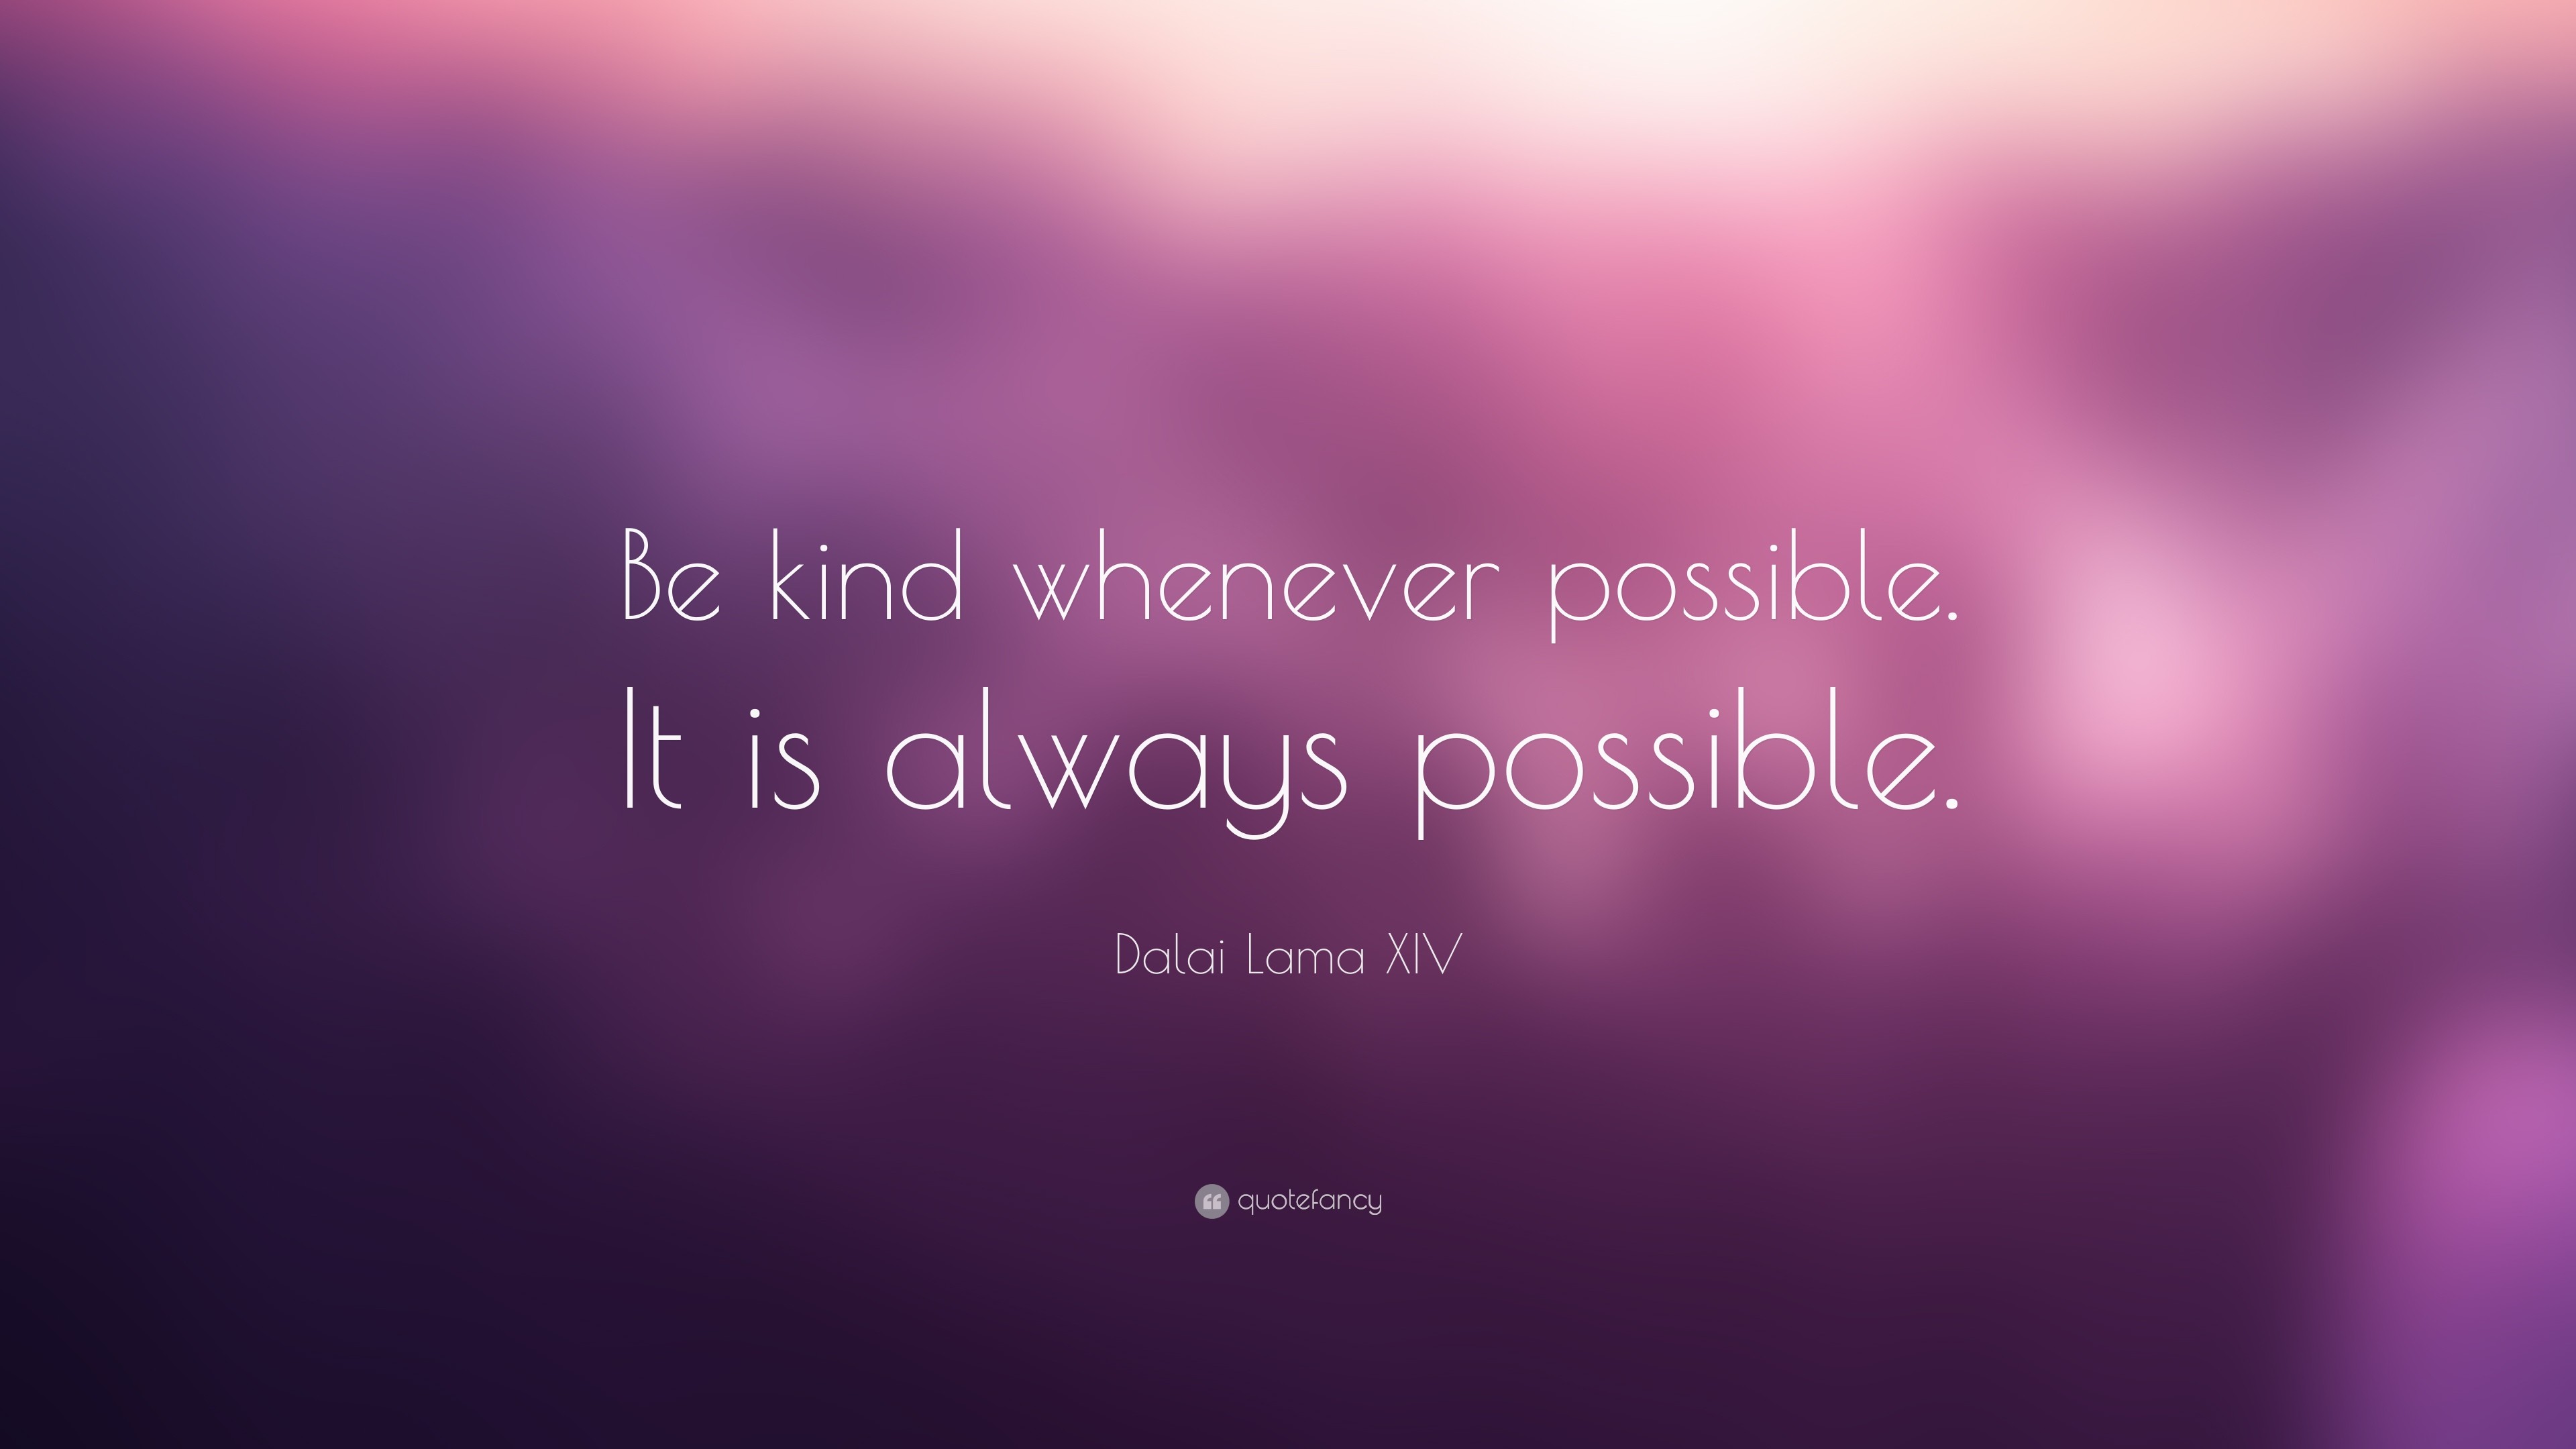 3840x2160 Dalai Lama XIV Quote: “Be kind whenever possible. It is always possible.